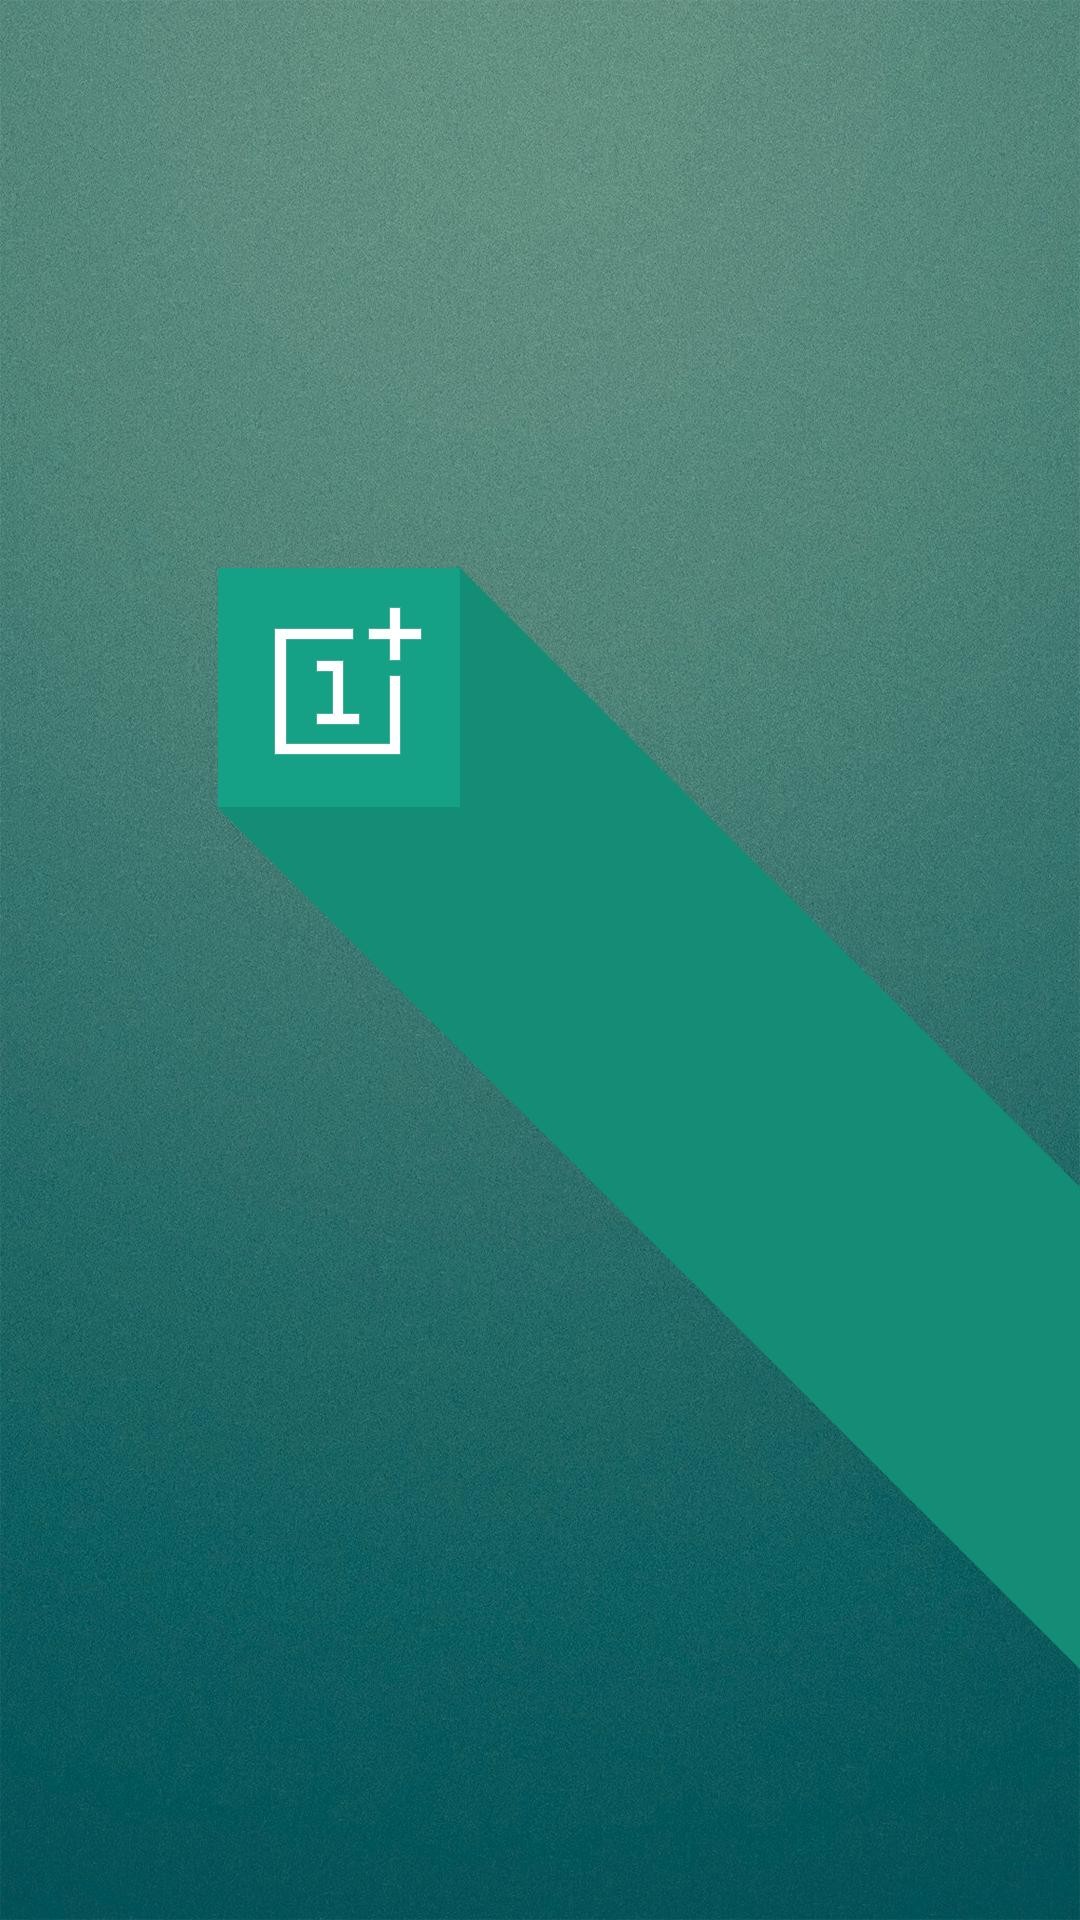 wallpaper for oneplus 3t,green,aqua,turquoise,text,teal